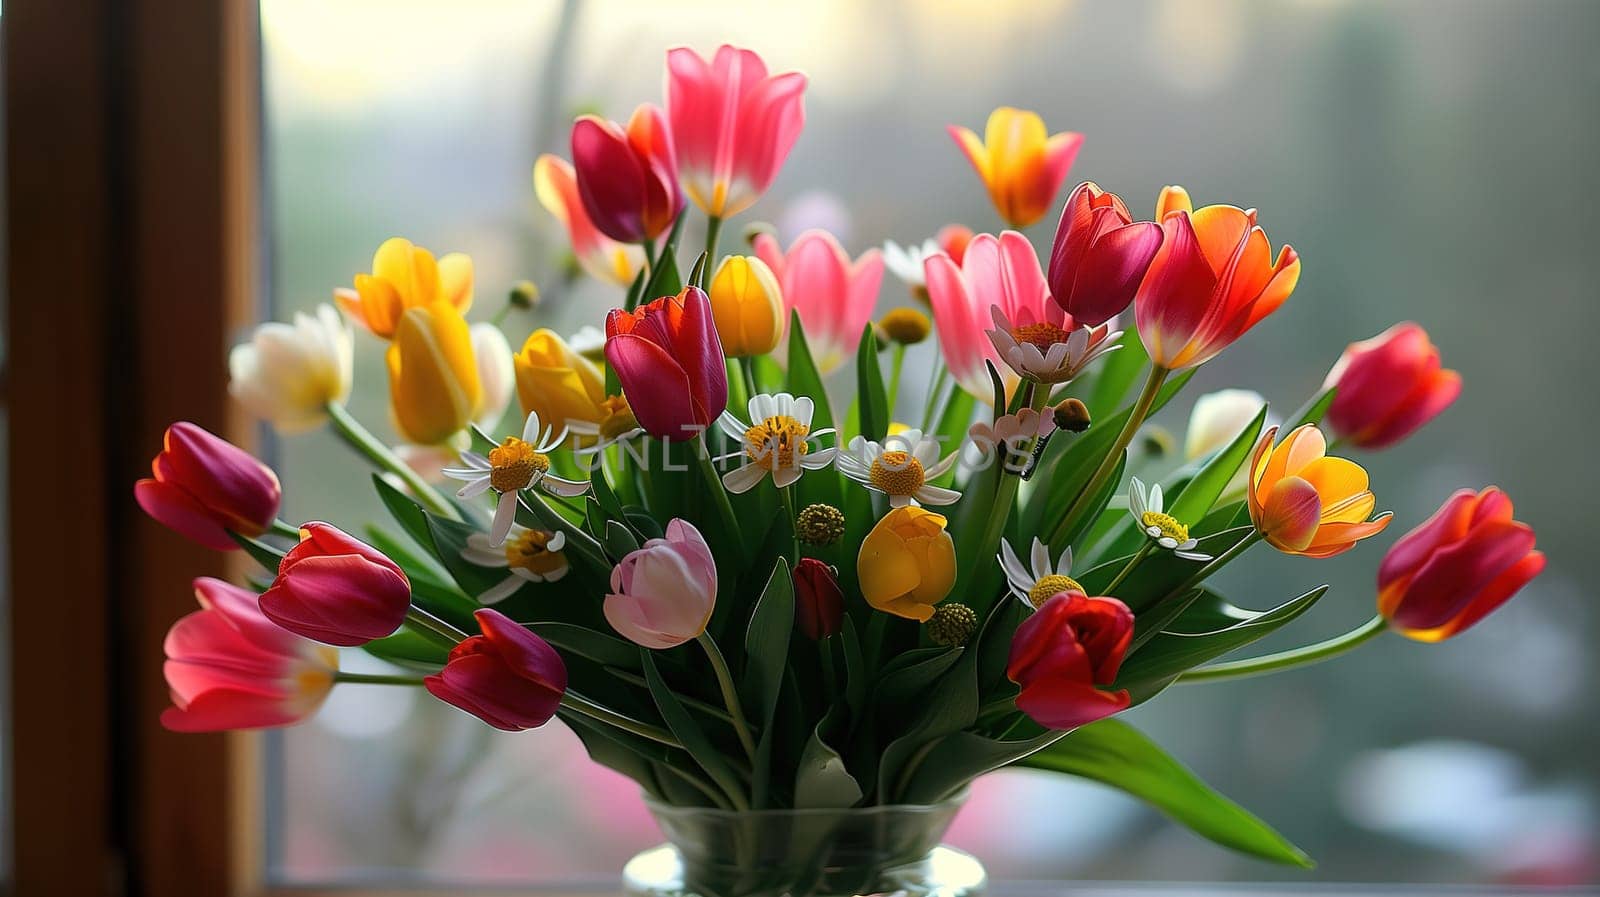 Colorful Flowers in Vase by TRMK